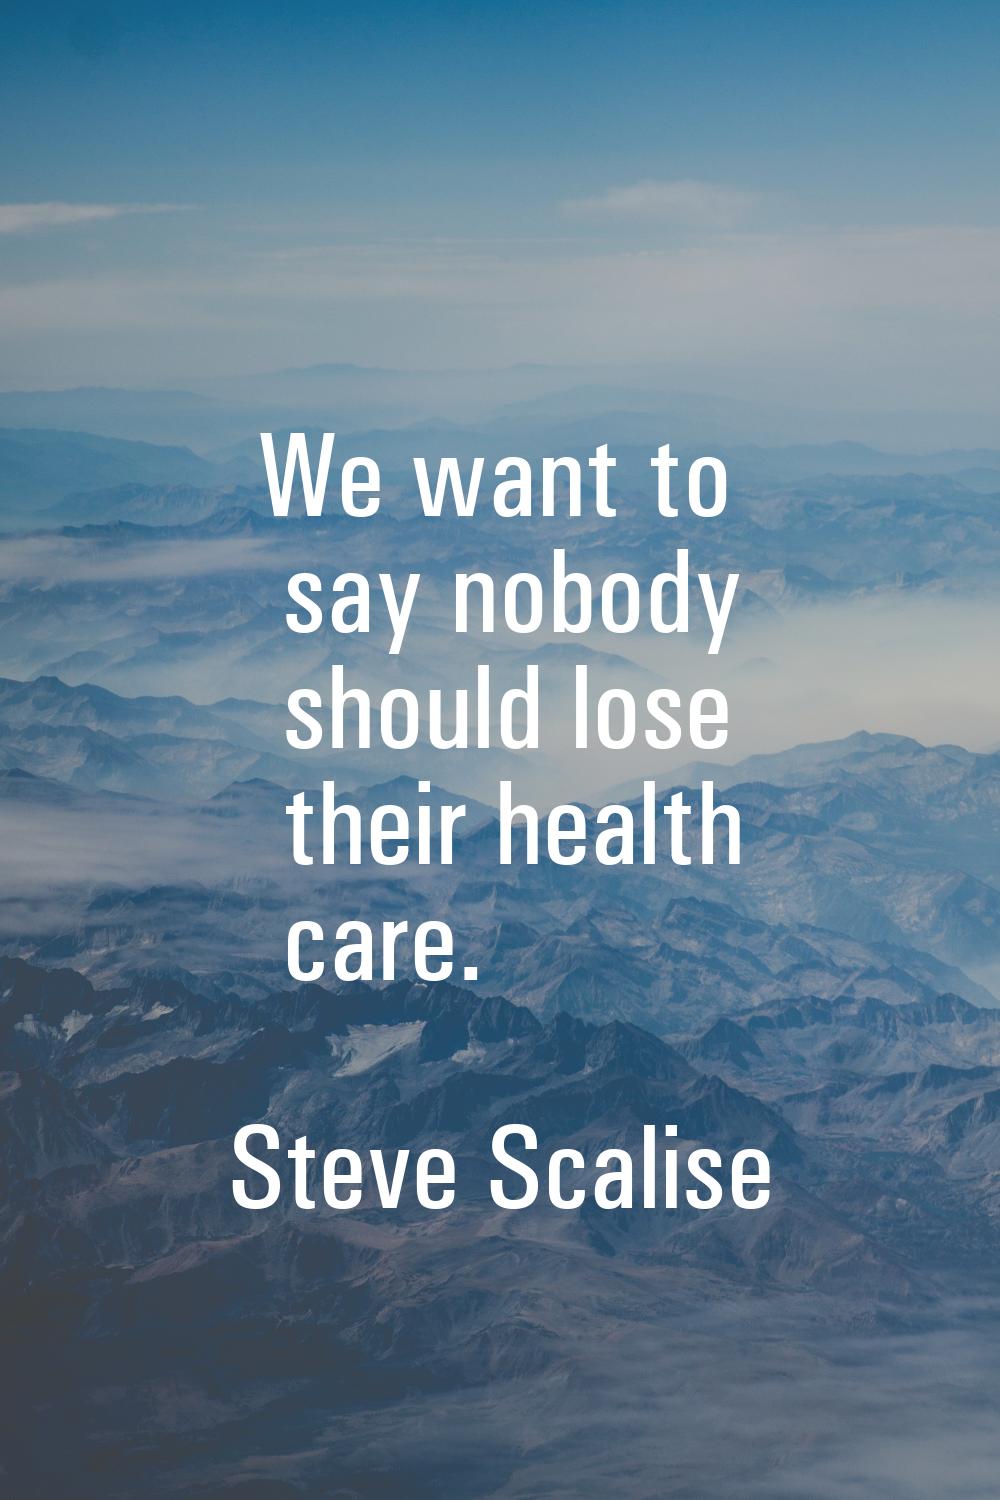 We want to say nobody should lose their health care.